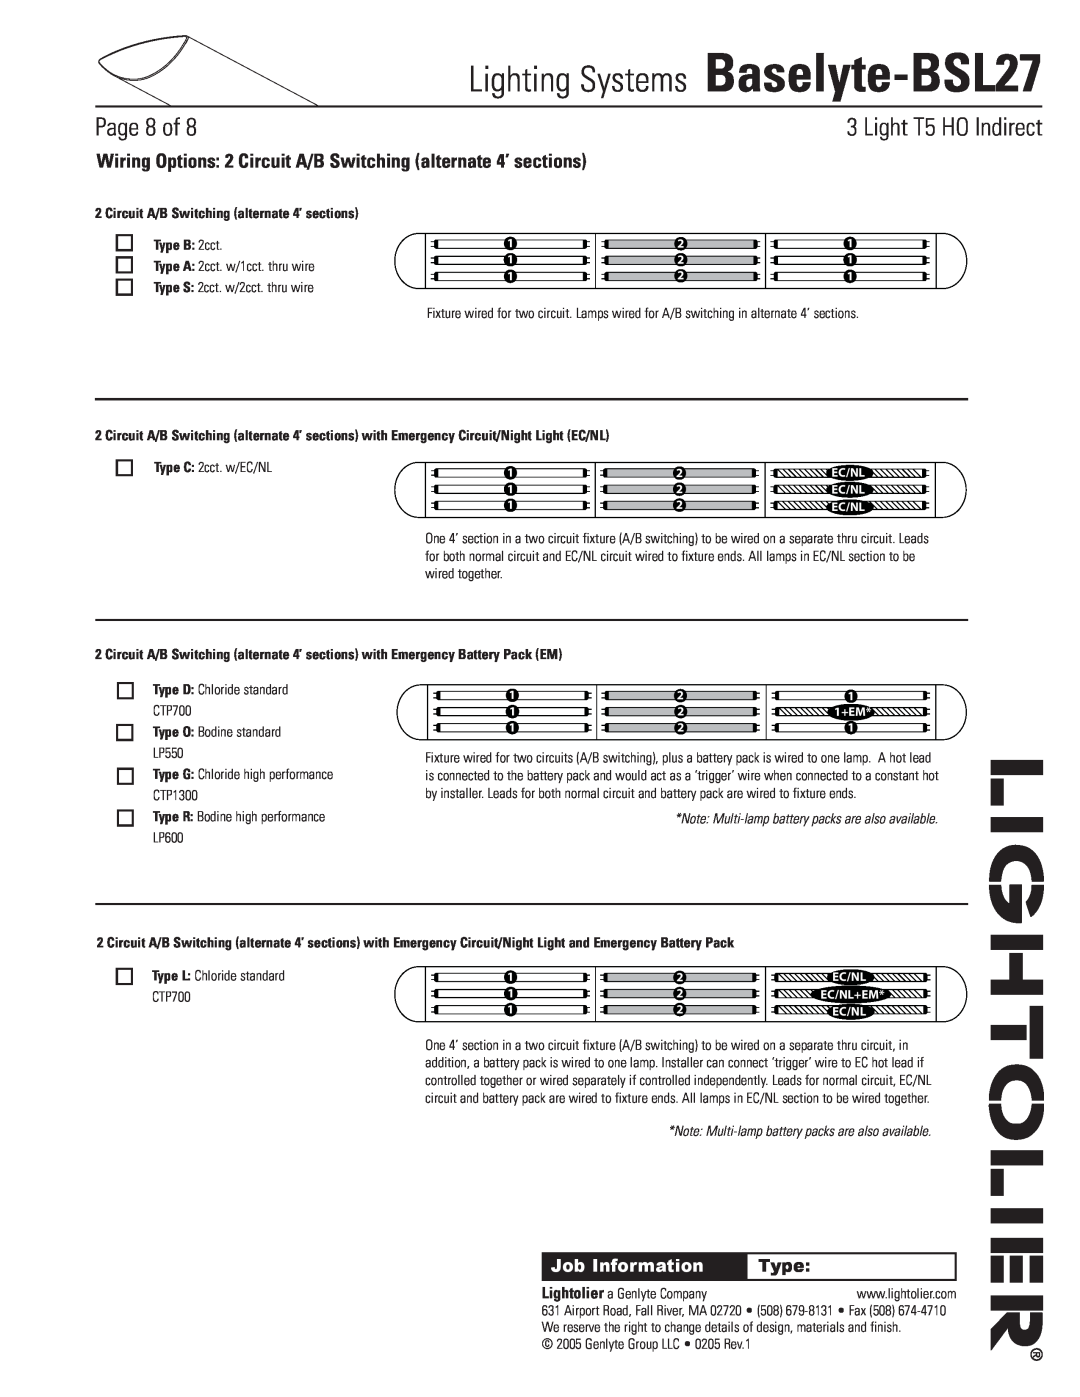 Lightolier Baselyte-BSL27 Circuit A/B Switching alternate 4’ sections, Type B 2cct, Type O Bodine standard LP550, Page of 